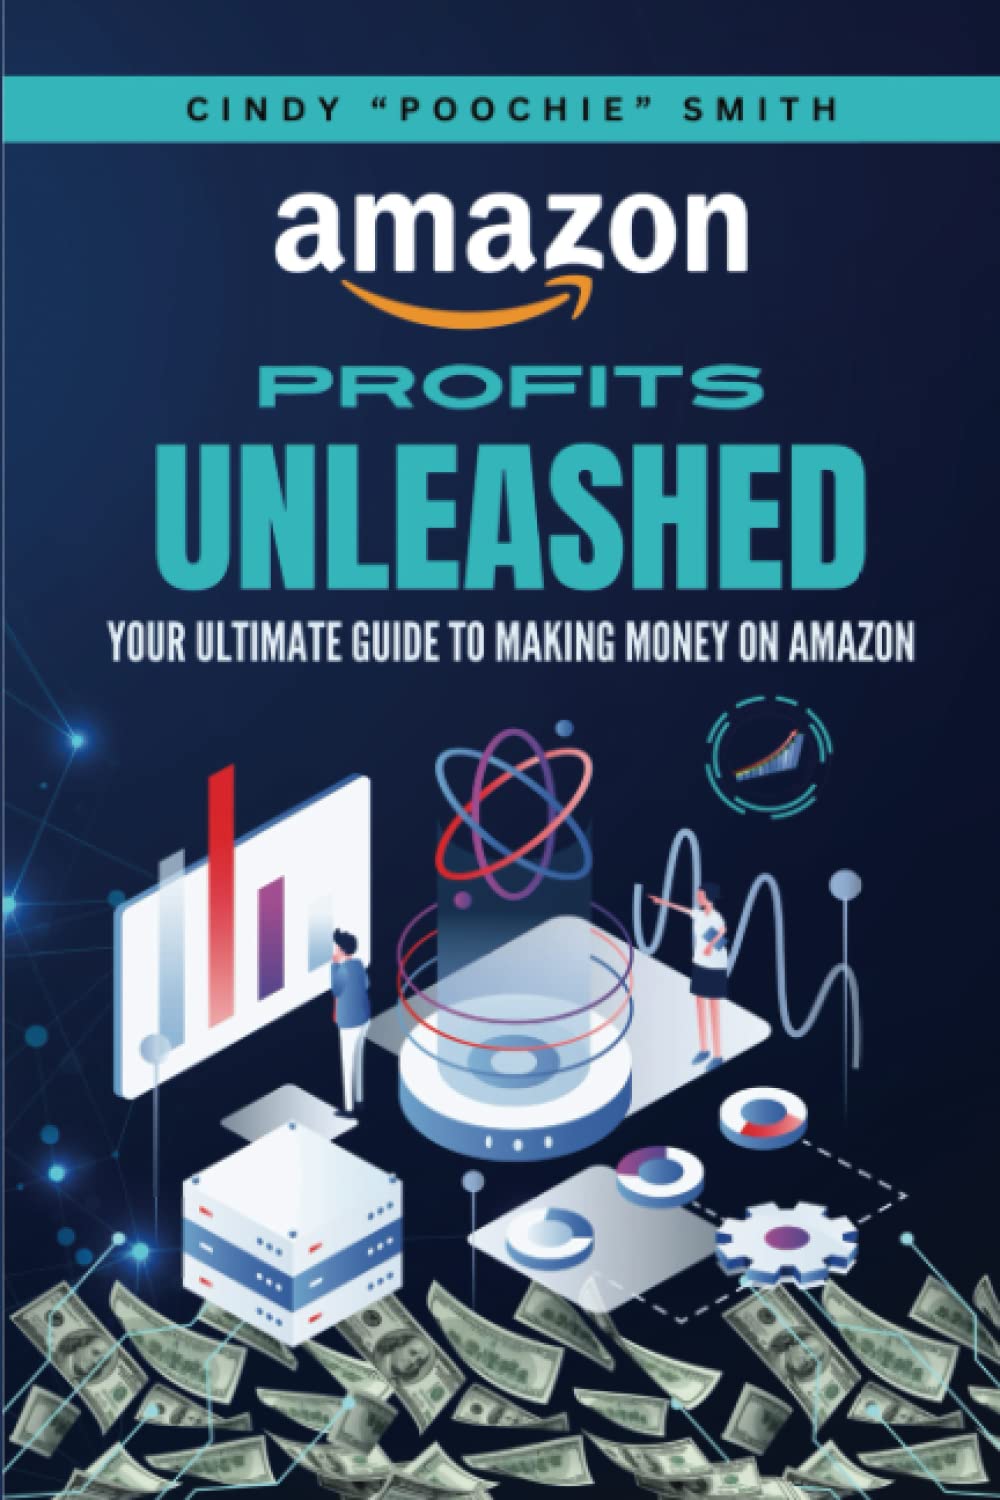 Amazon Profits Unleashed: Your Ultimate Guide to Making Money on Amazon Paperback Book by Cindy 